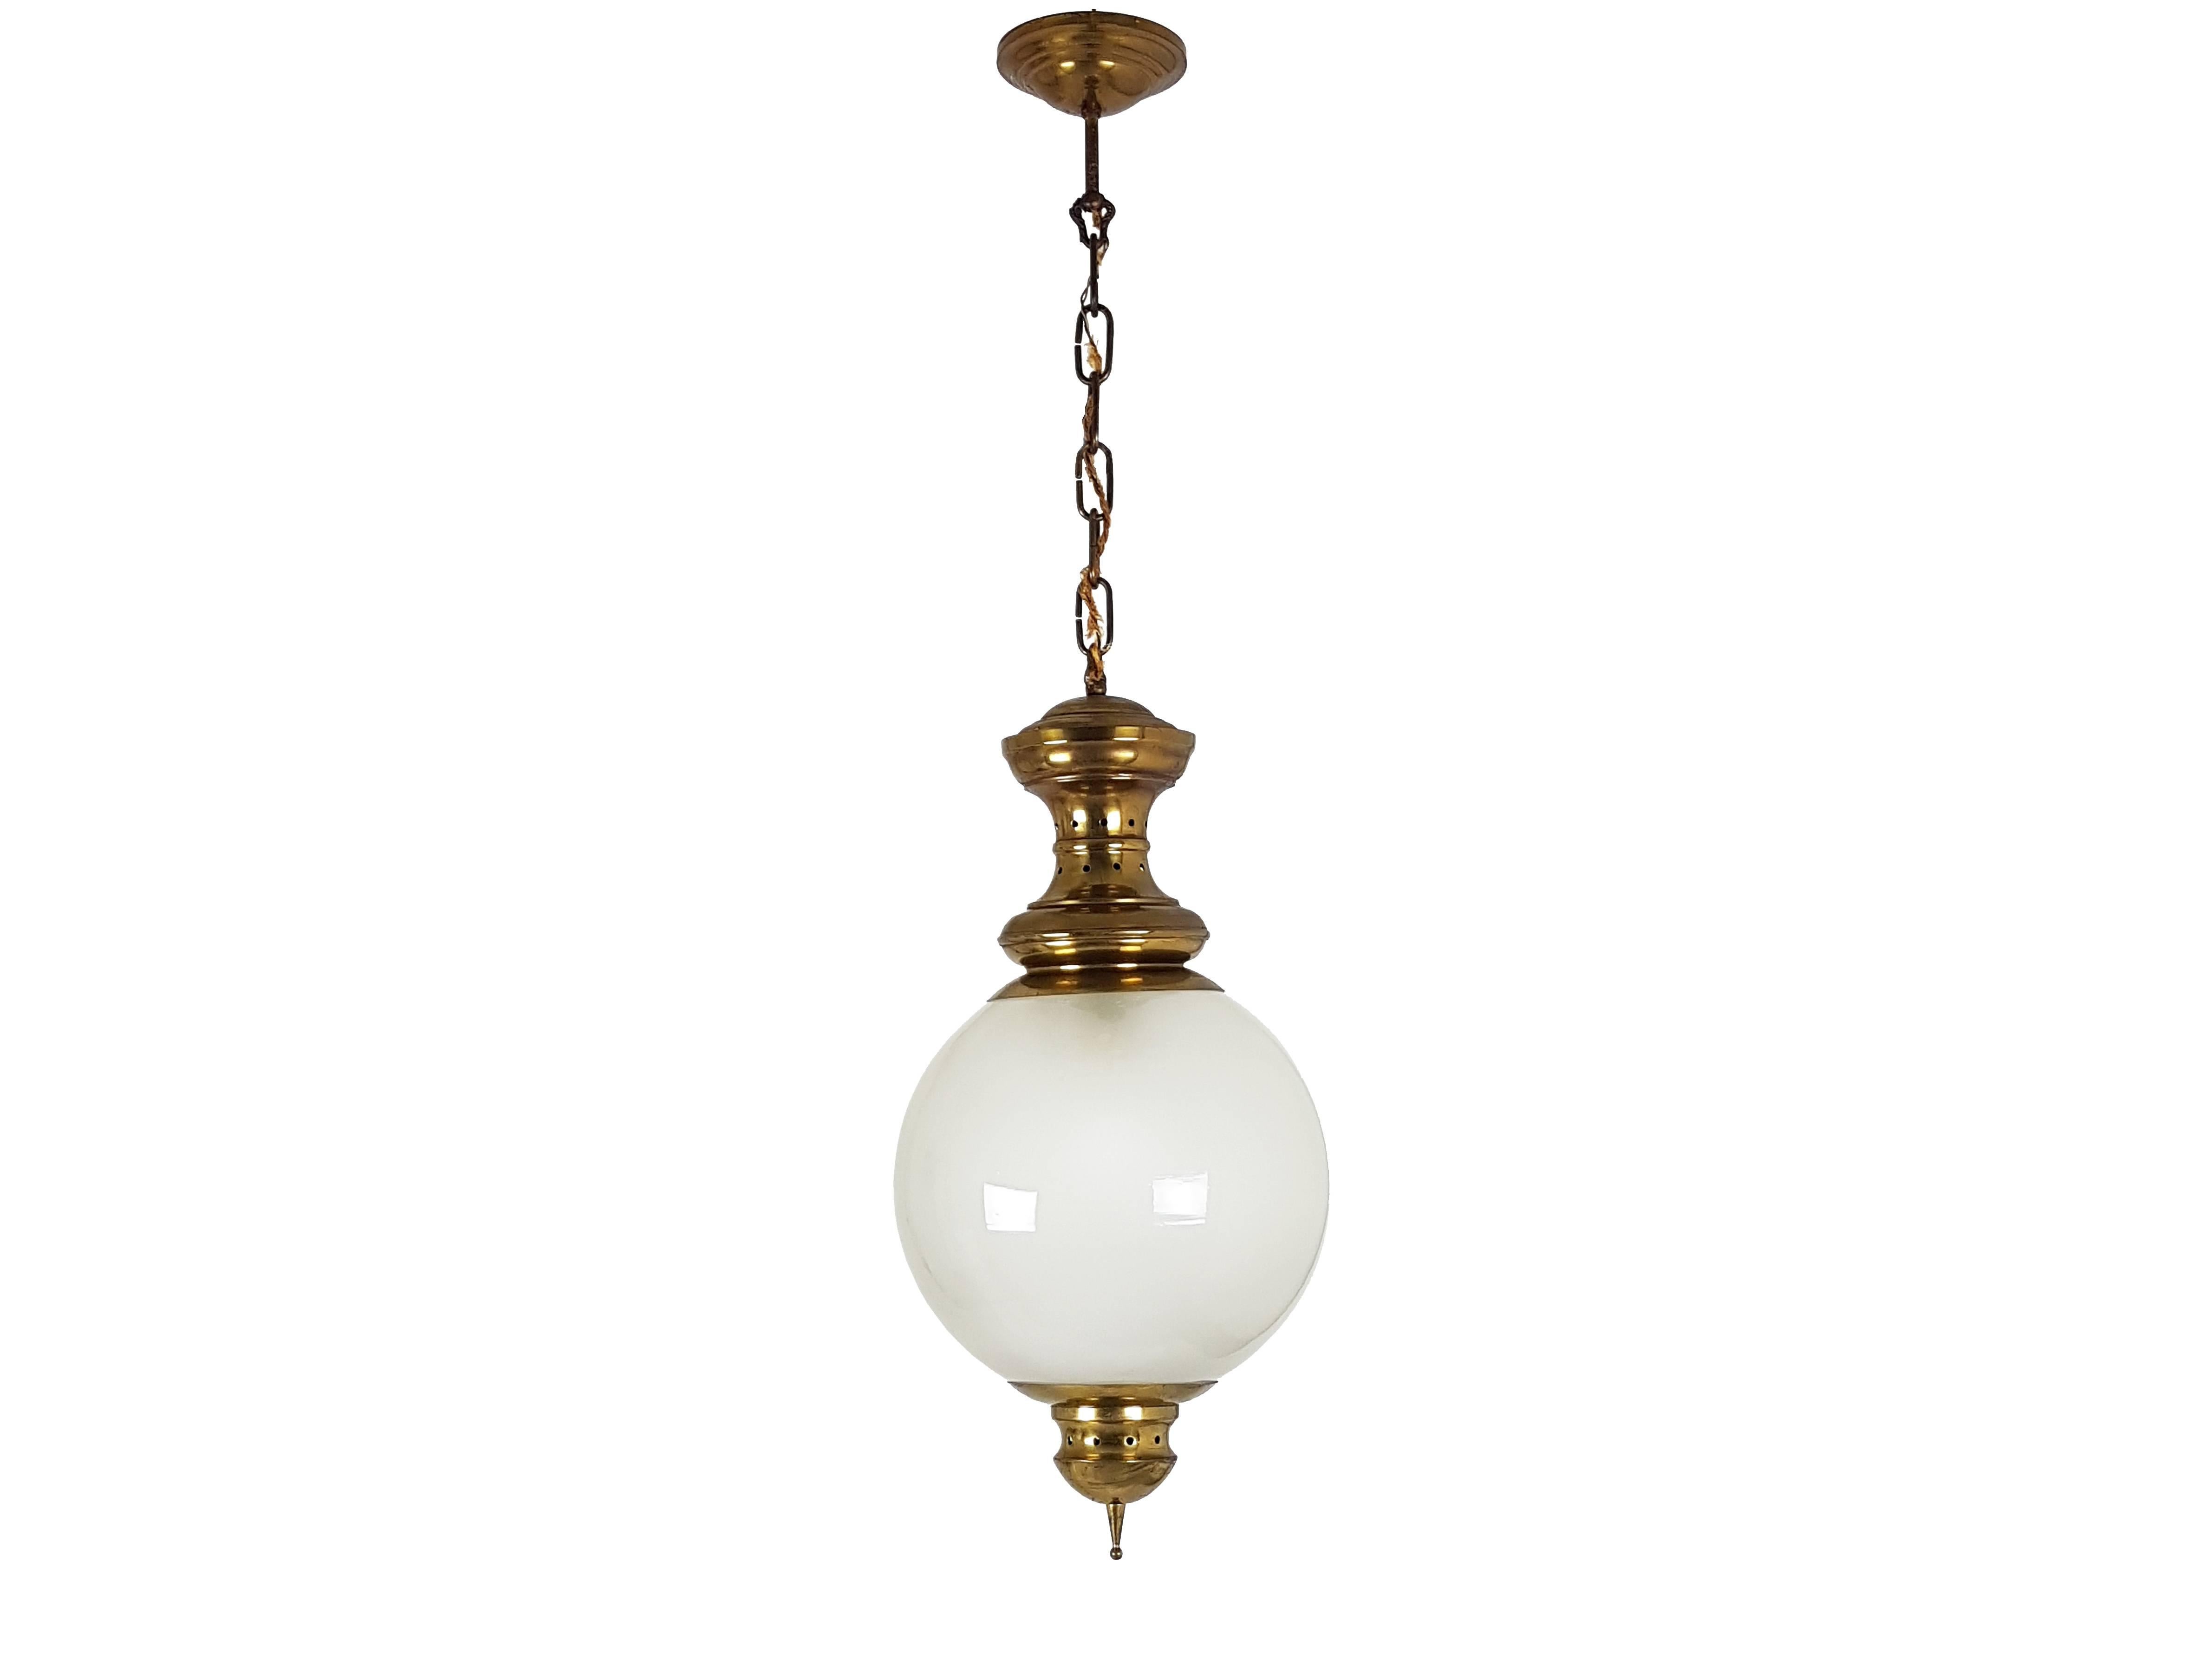 This elegant pendant is a classic Italian Azucena model. It is made from a brass frame and a spherical sandblasted glass shade. Very good vintage condition.